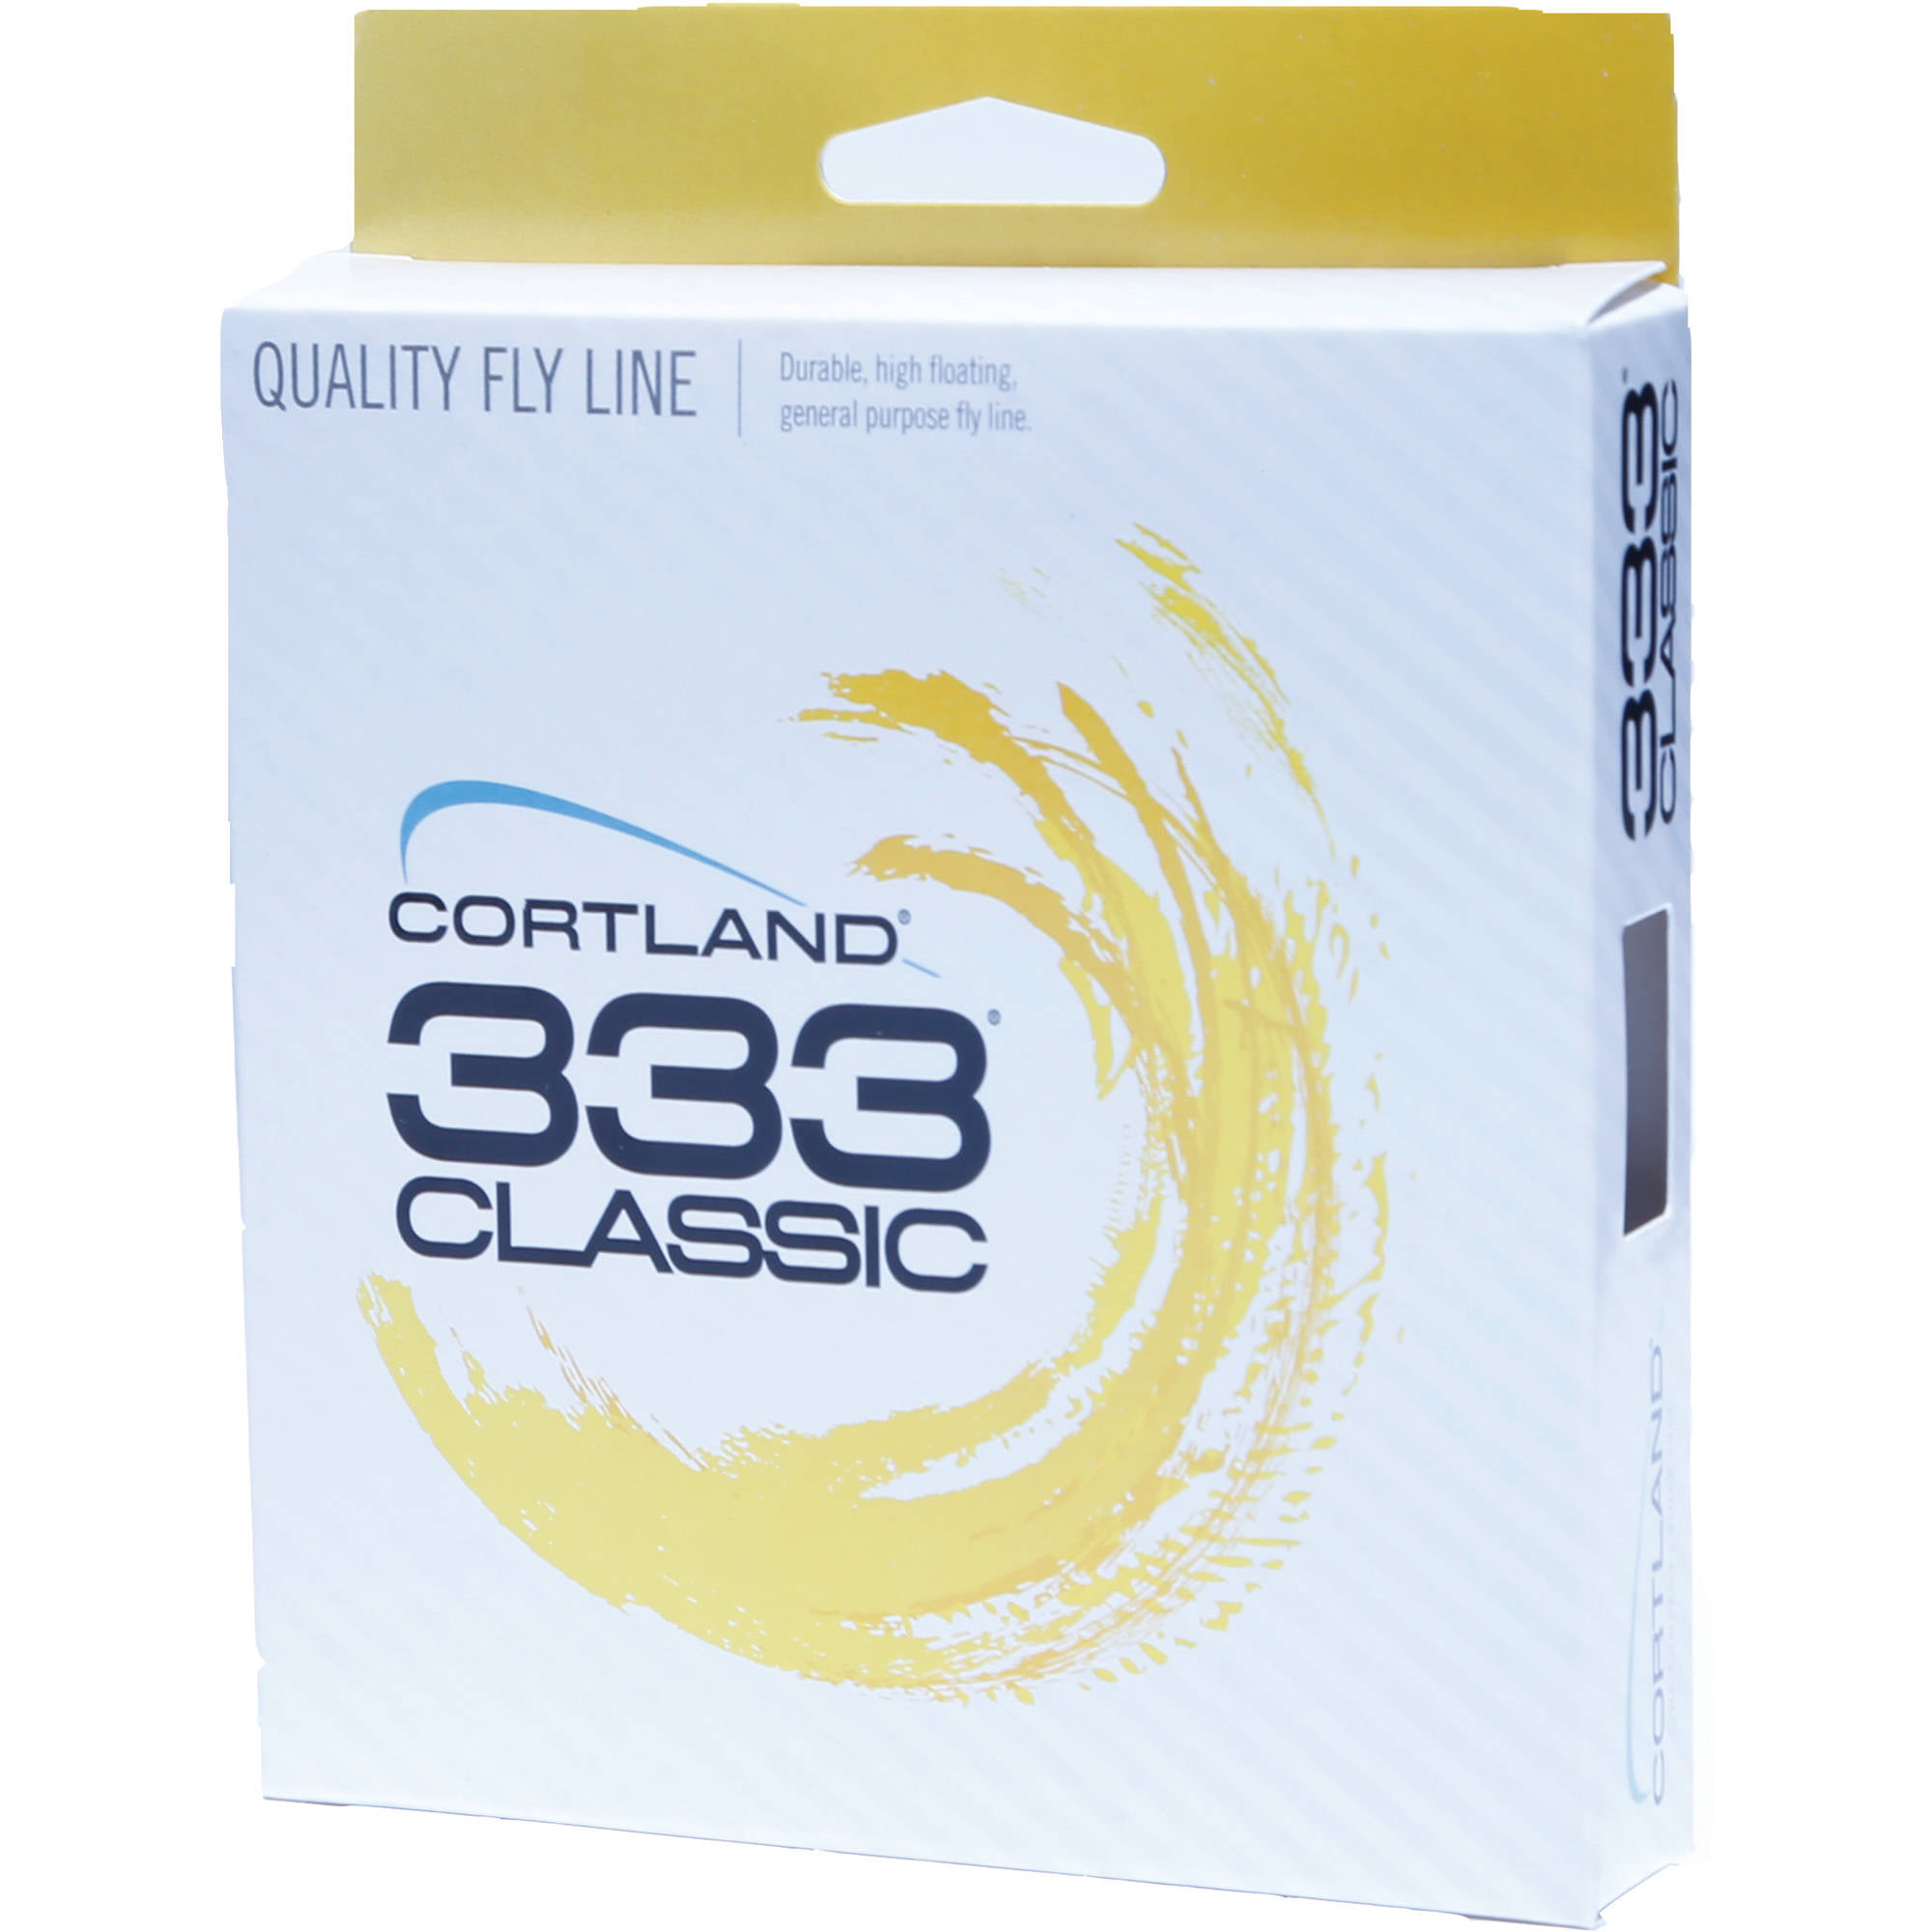 Cortland Fly line 333 Classic Fly fishing WF Trout Fly fishing Fly lines